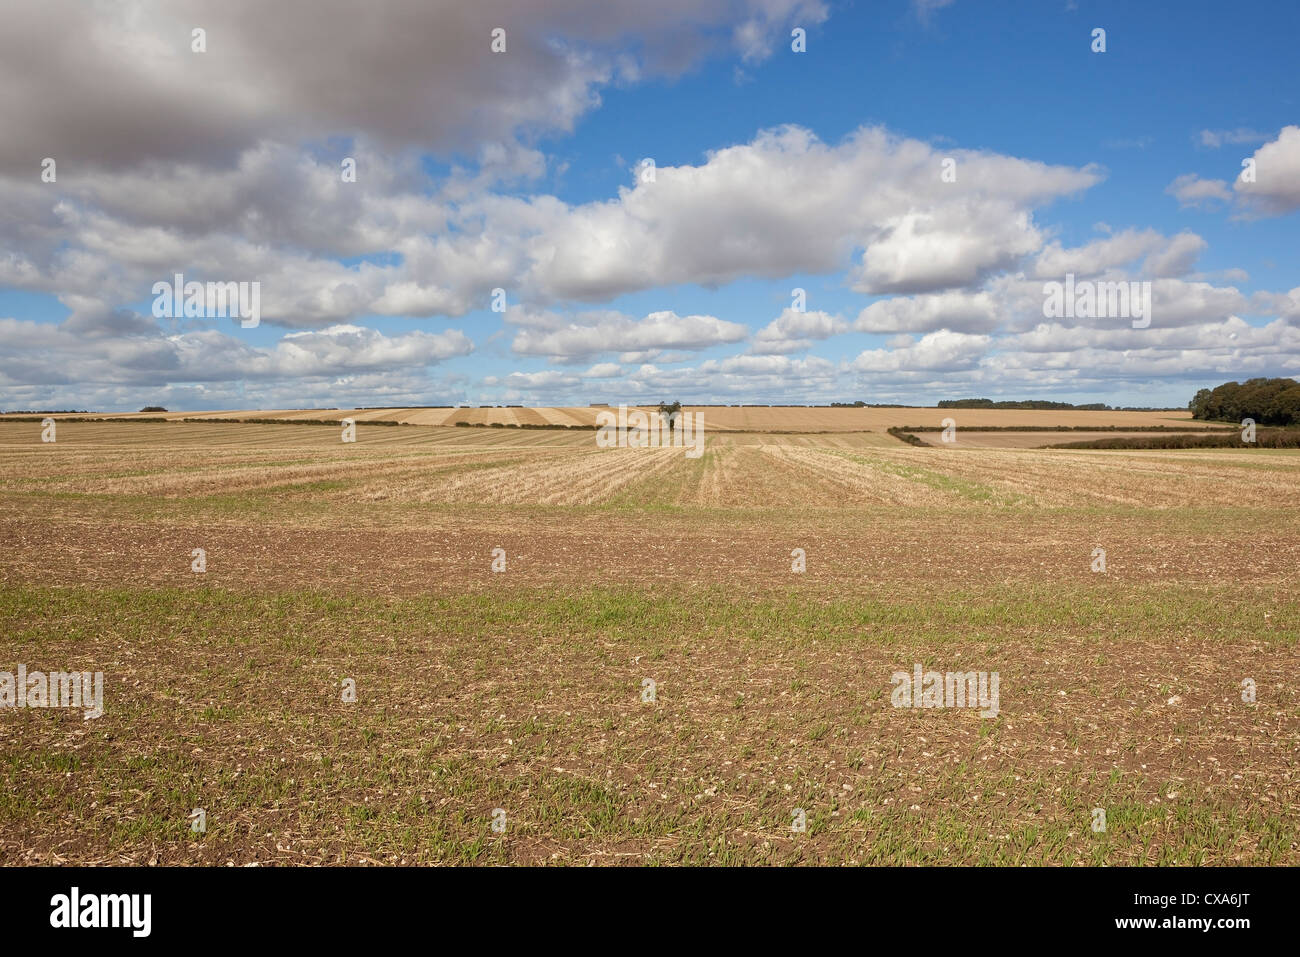 Newly sown crops at harvest time in the scenic Yorkshire wolds england under a cloudy blue sky Stock Photo